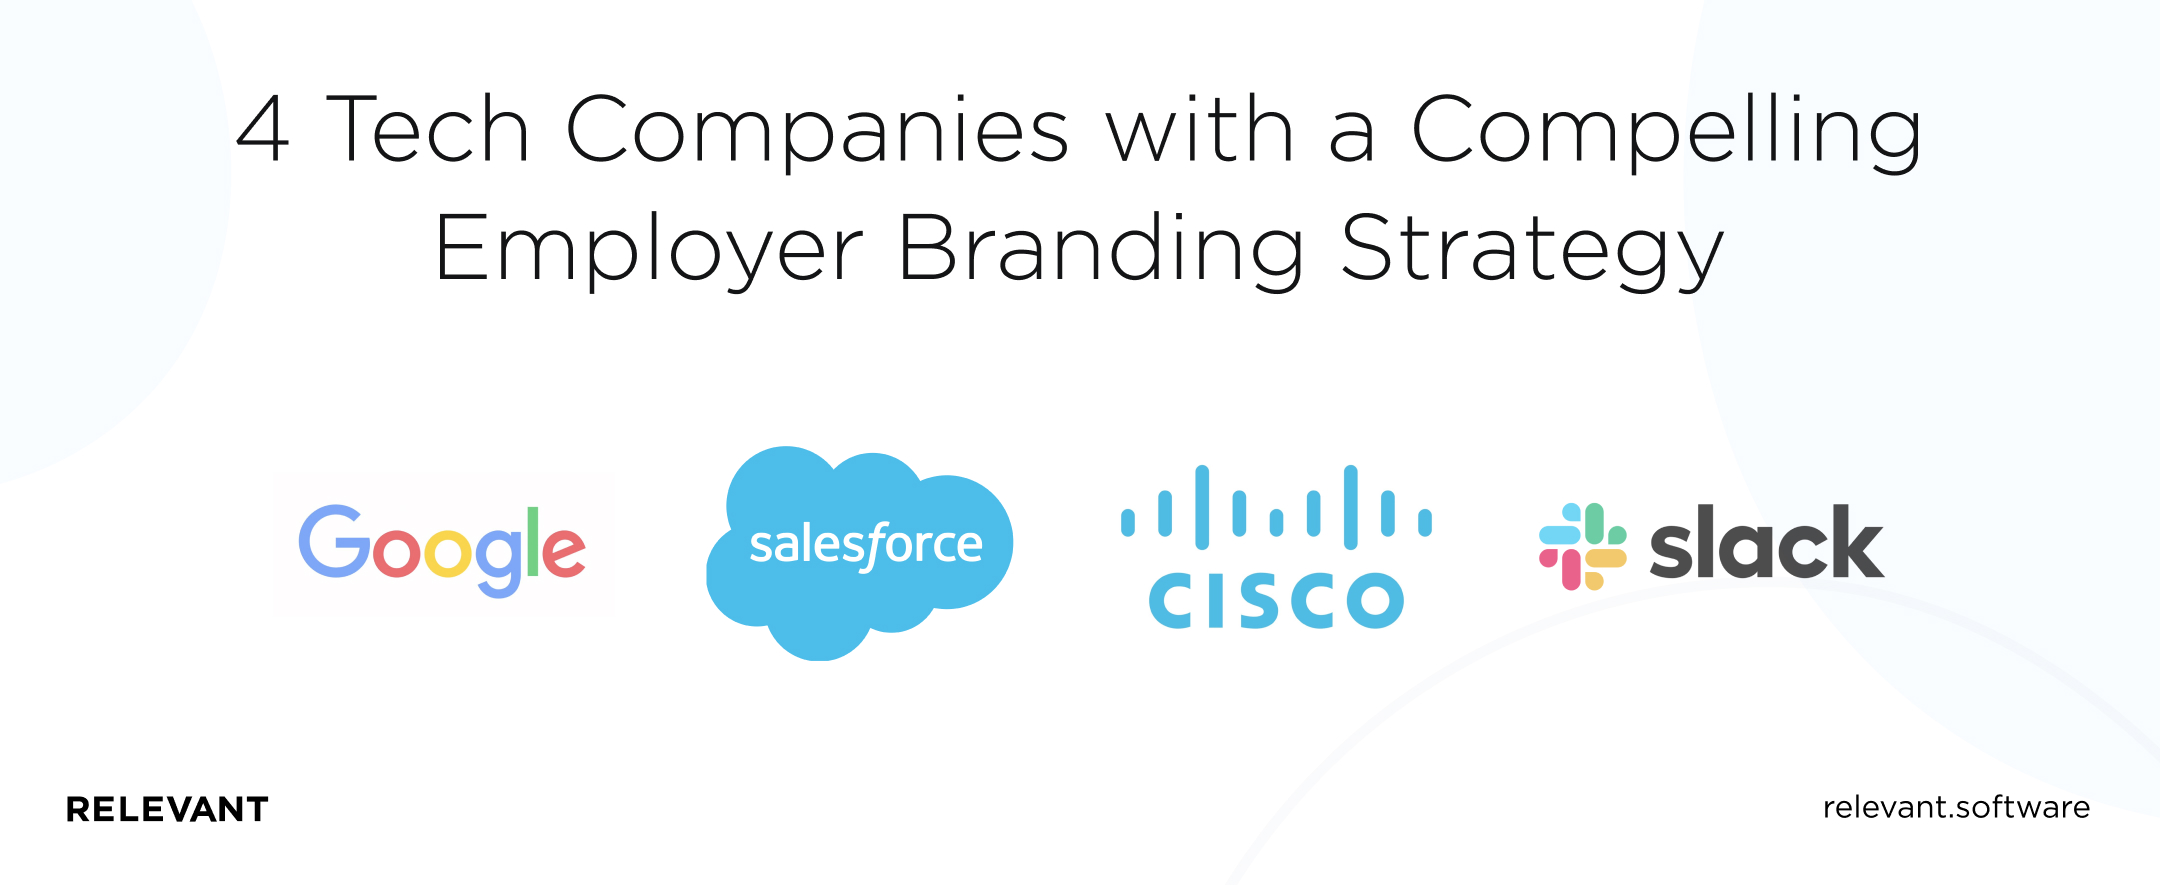 4 Tech Companies with a Compelling Employer Branding Strategy